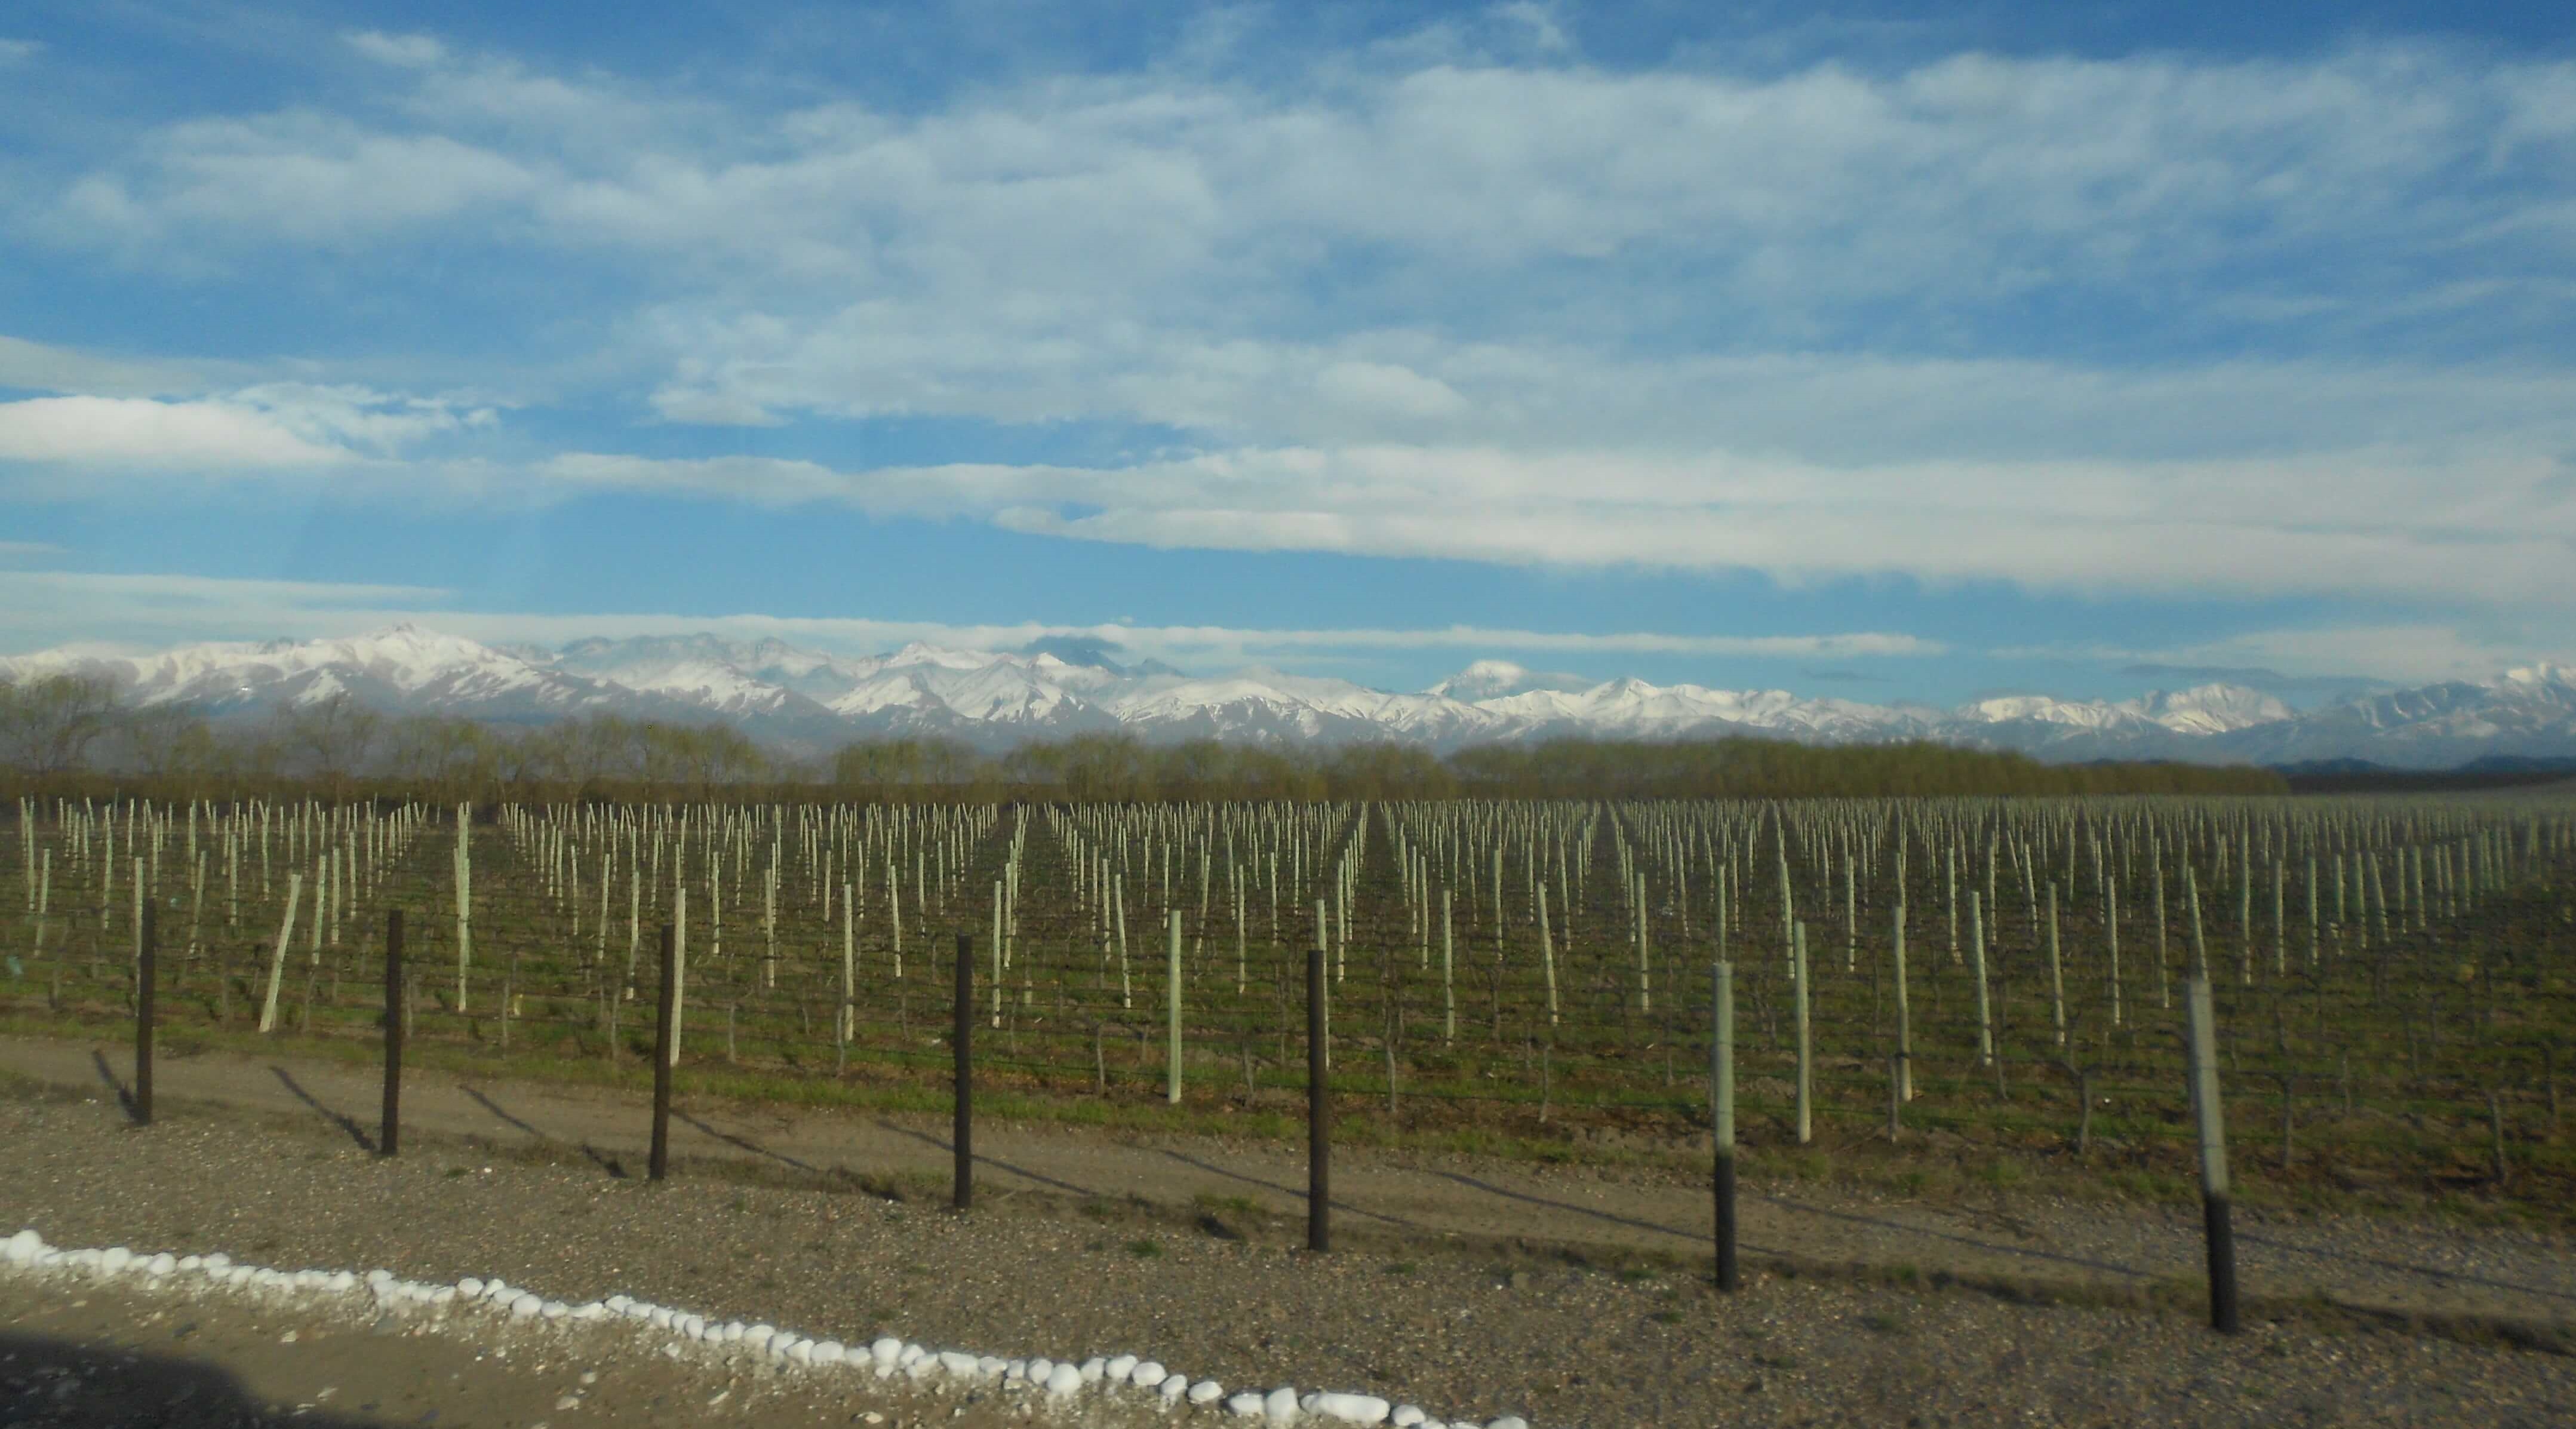 Vineyard in the foot of the Andes